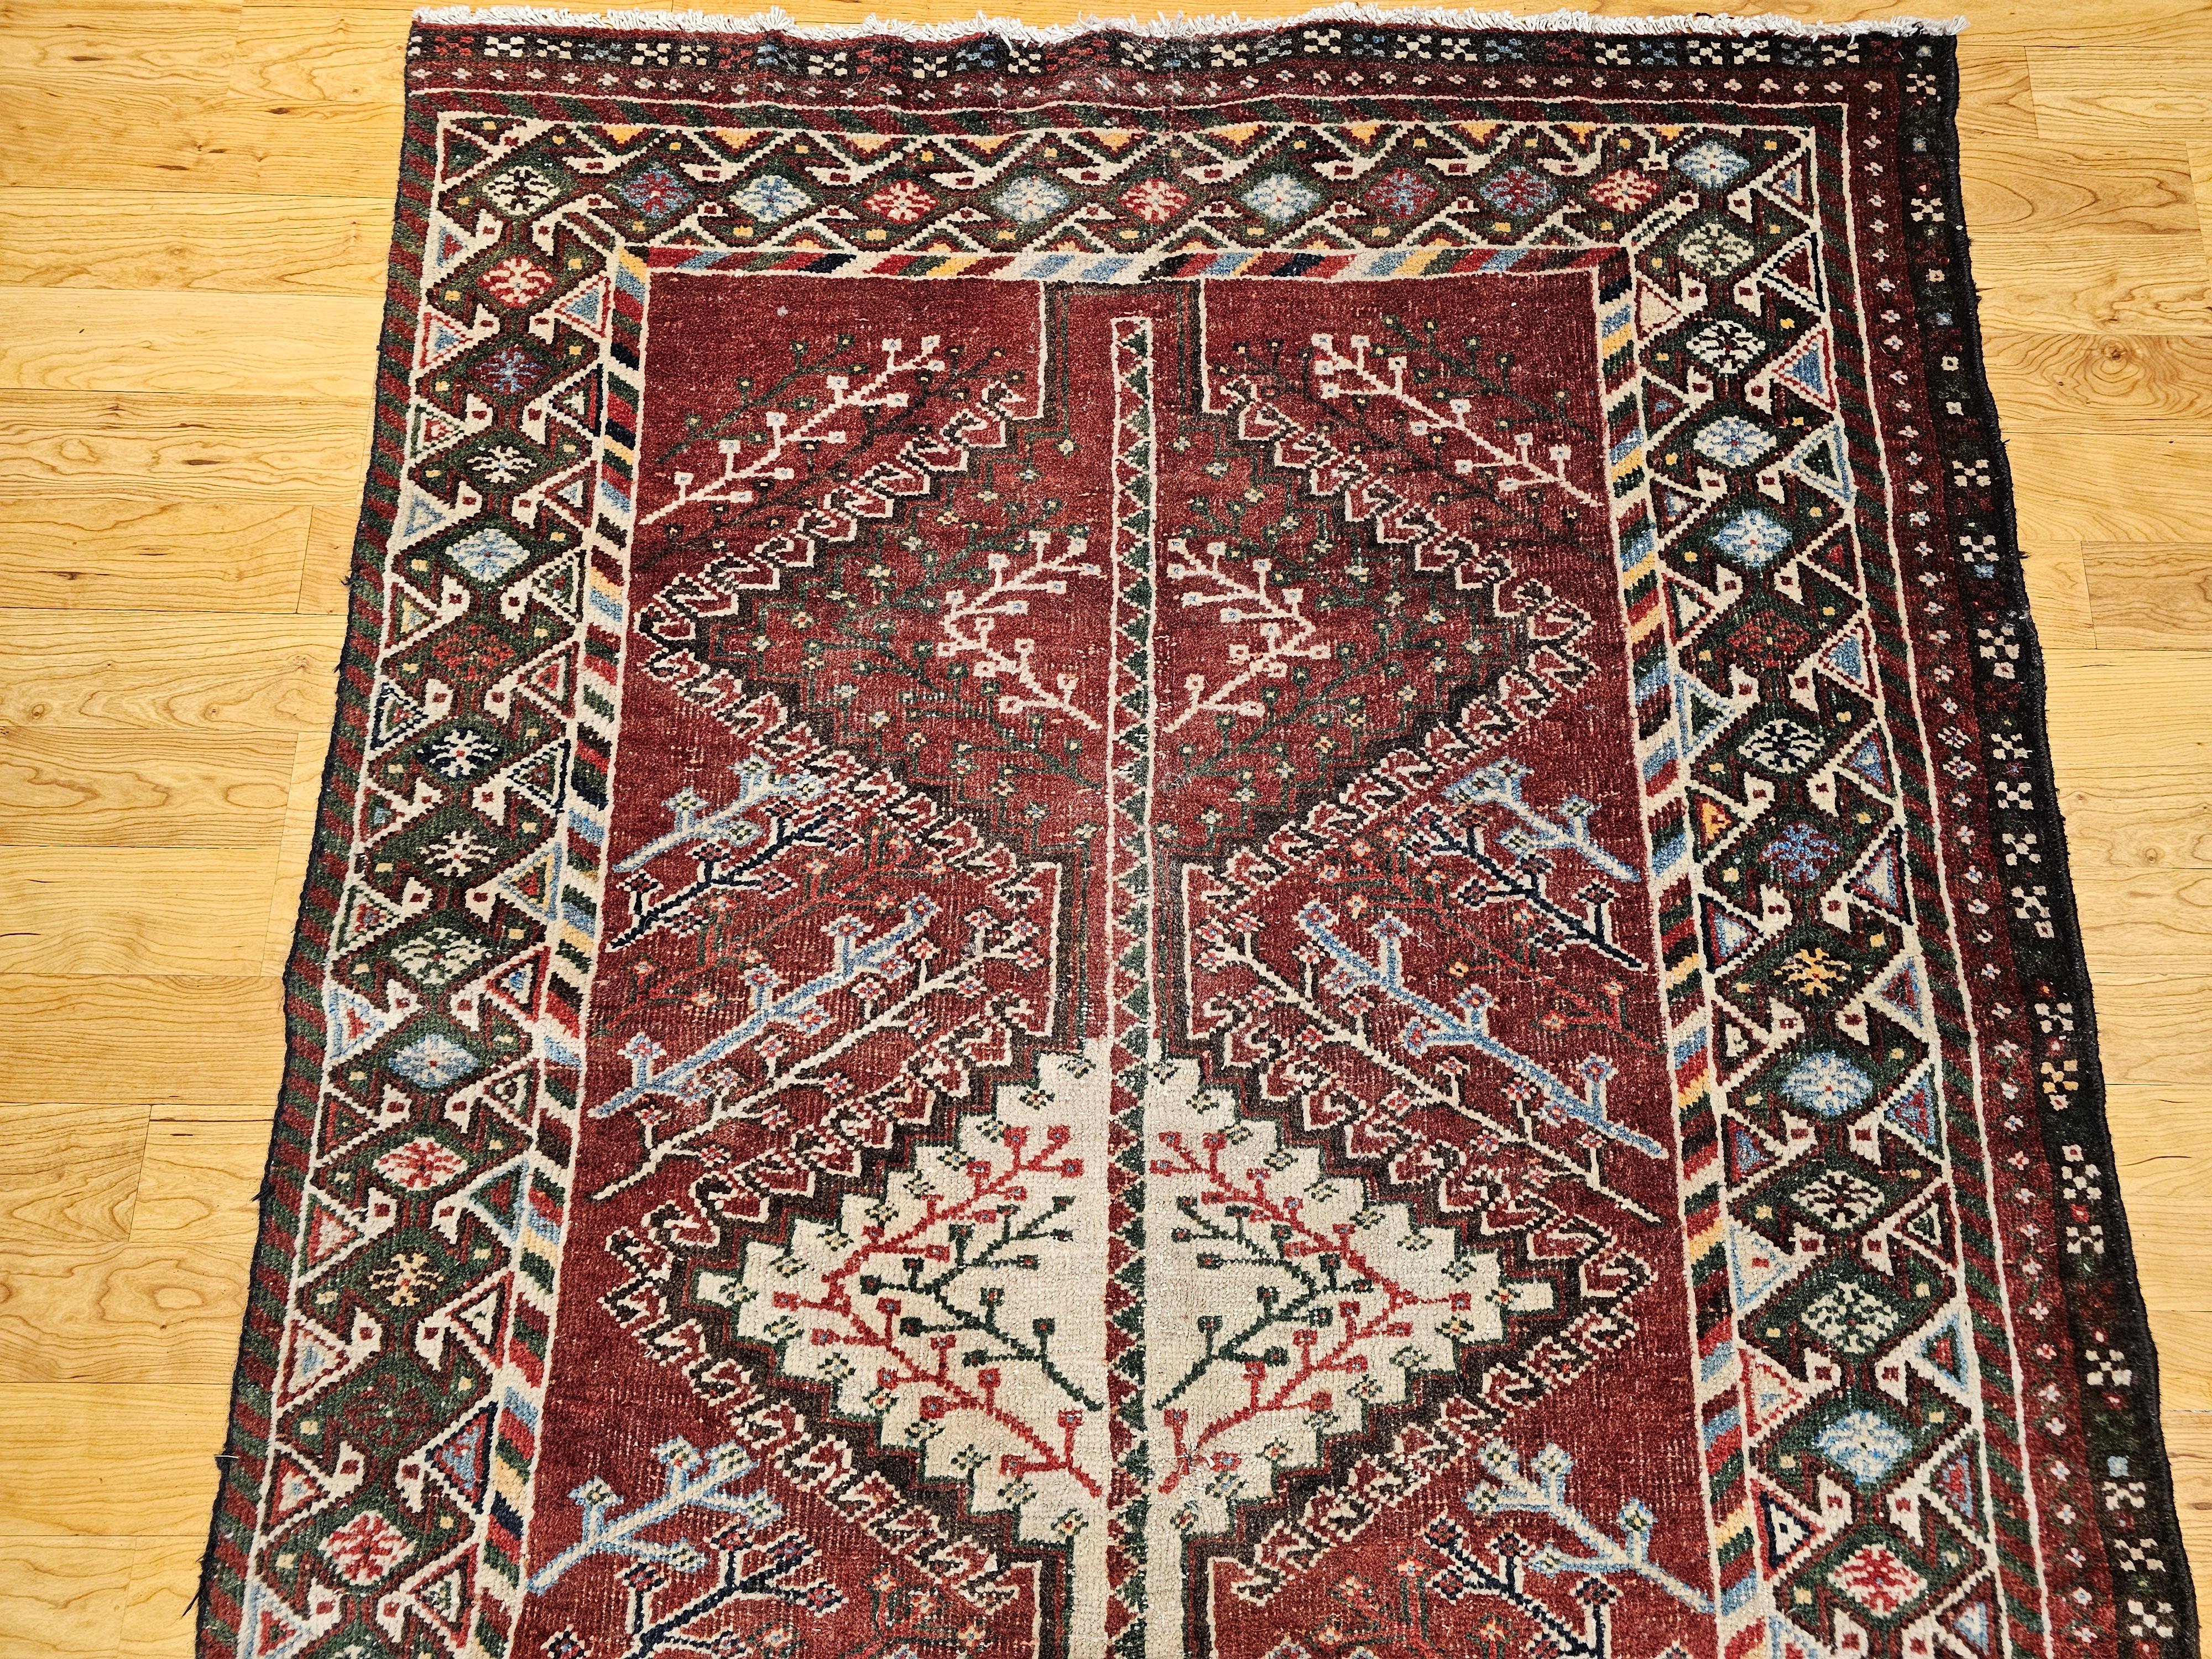 20th Century Vintage Persian Shiraz Tribal Area Rug in Burgundy, Ivory, Green, Blue For Sale